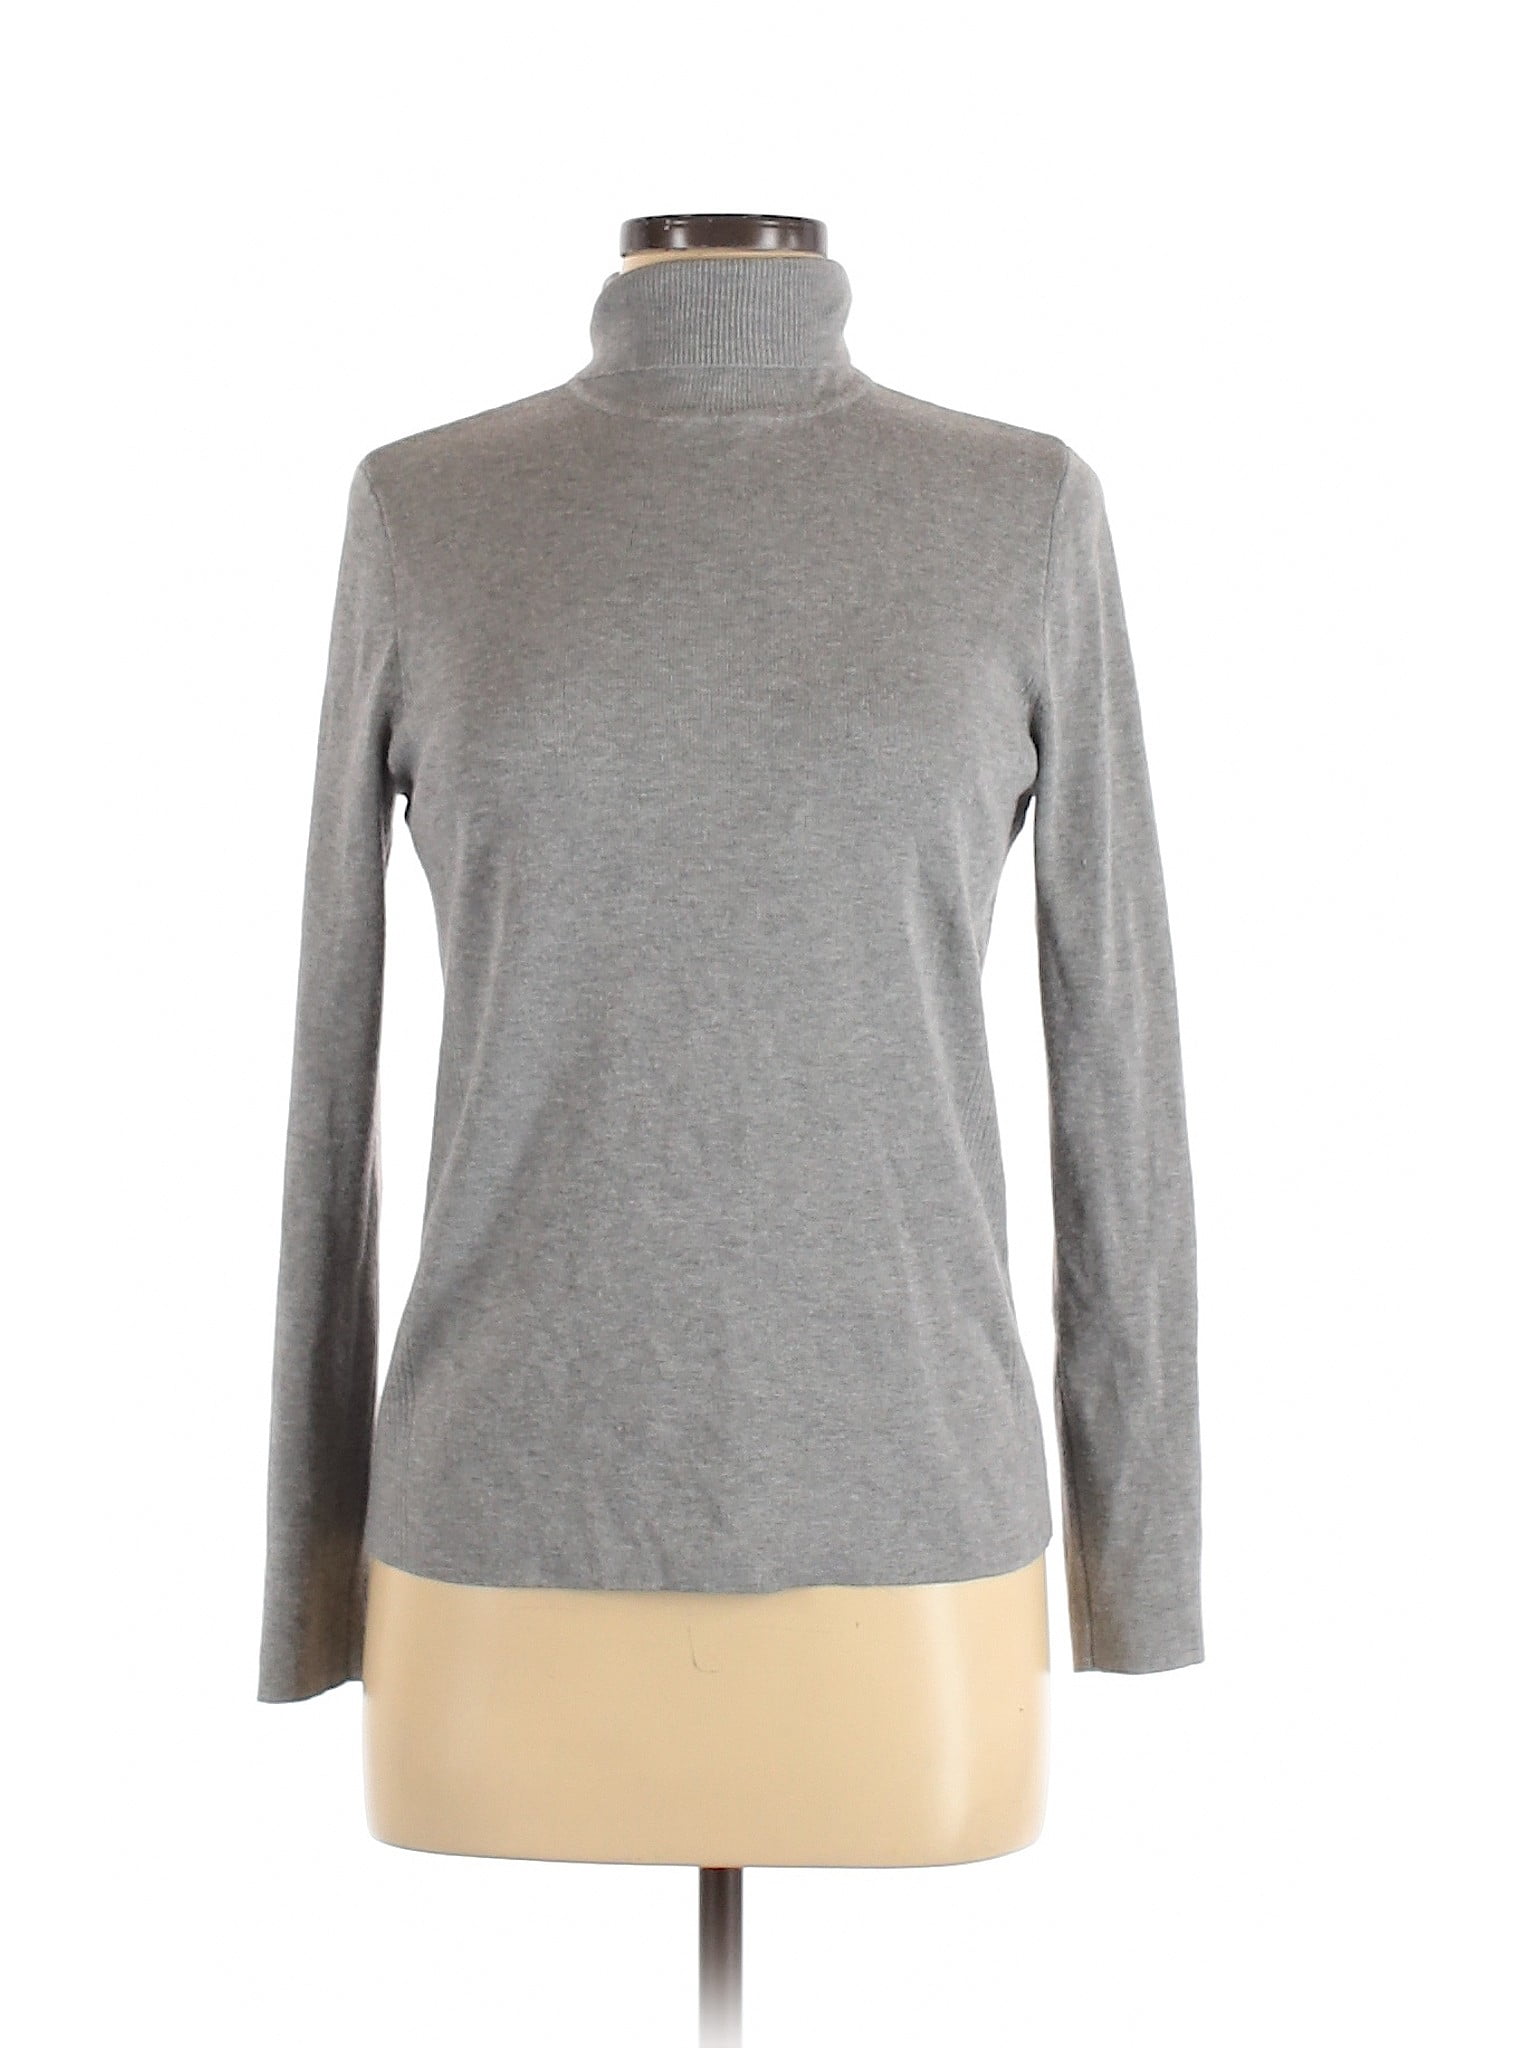 Chico's - Pre-Owned Chico's Women's Size M Turtleneck Sweater - Walmart ...